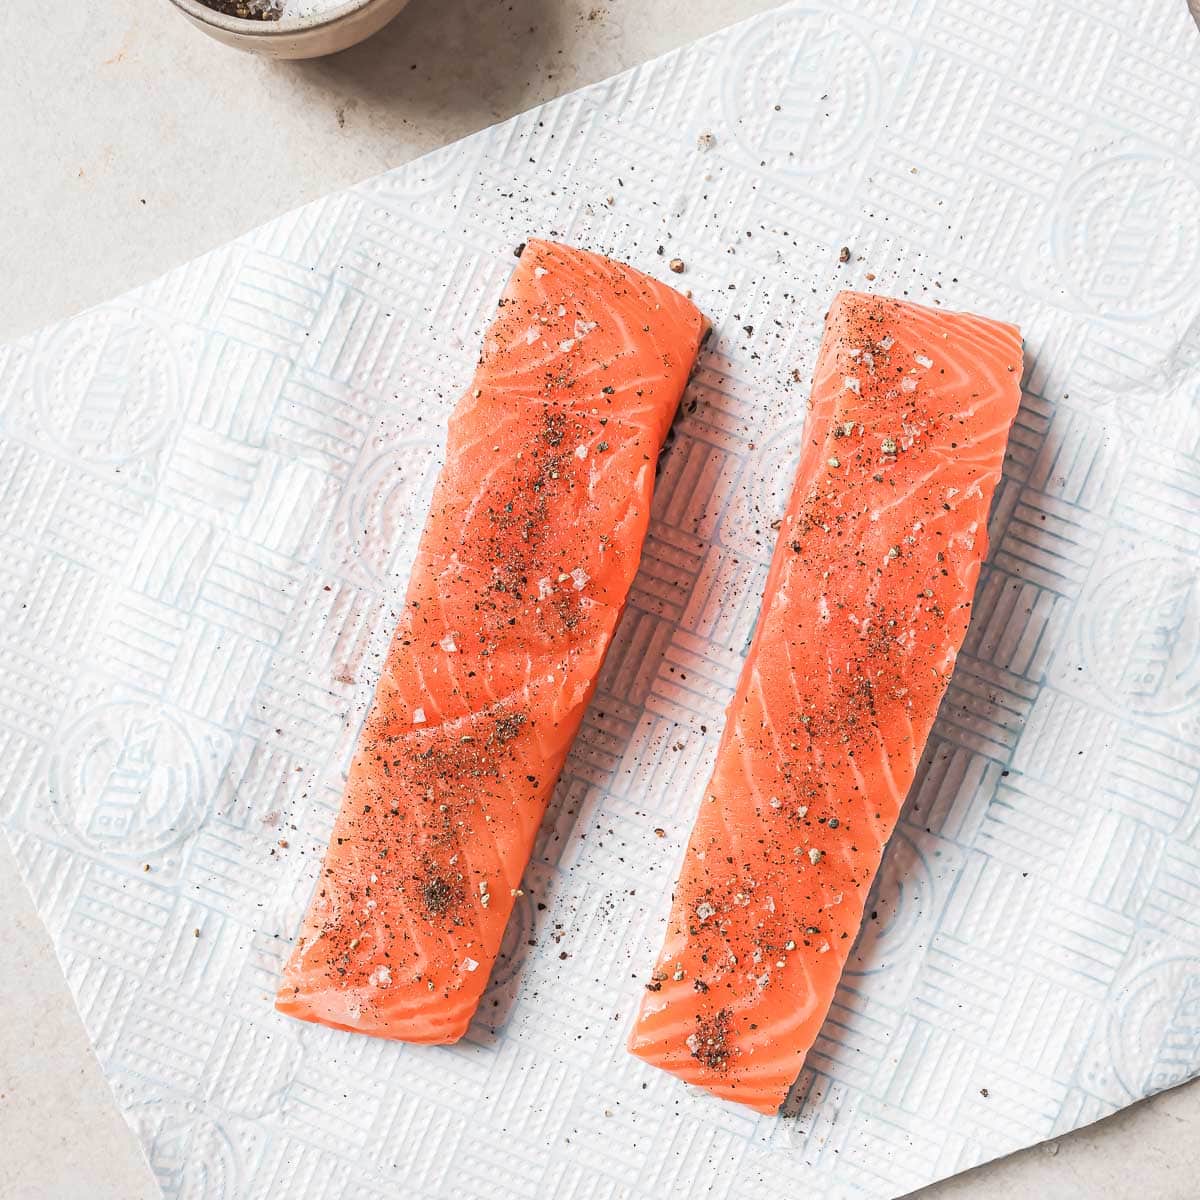 Two pieces of salmon on a paper towel.